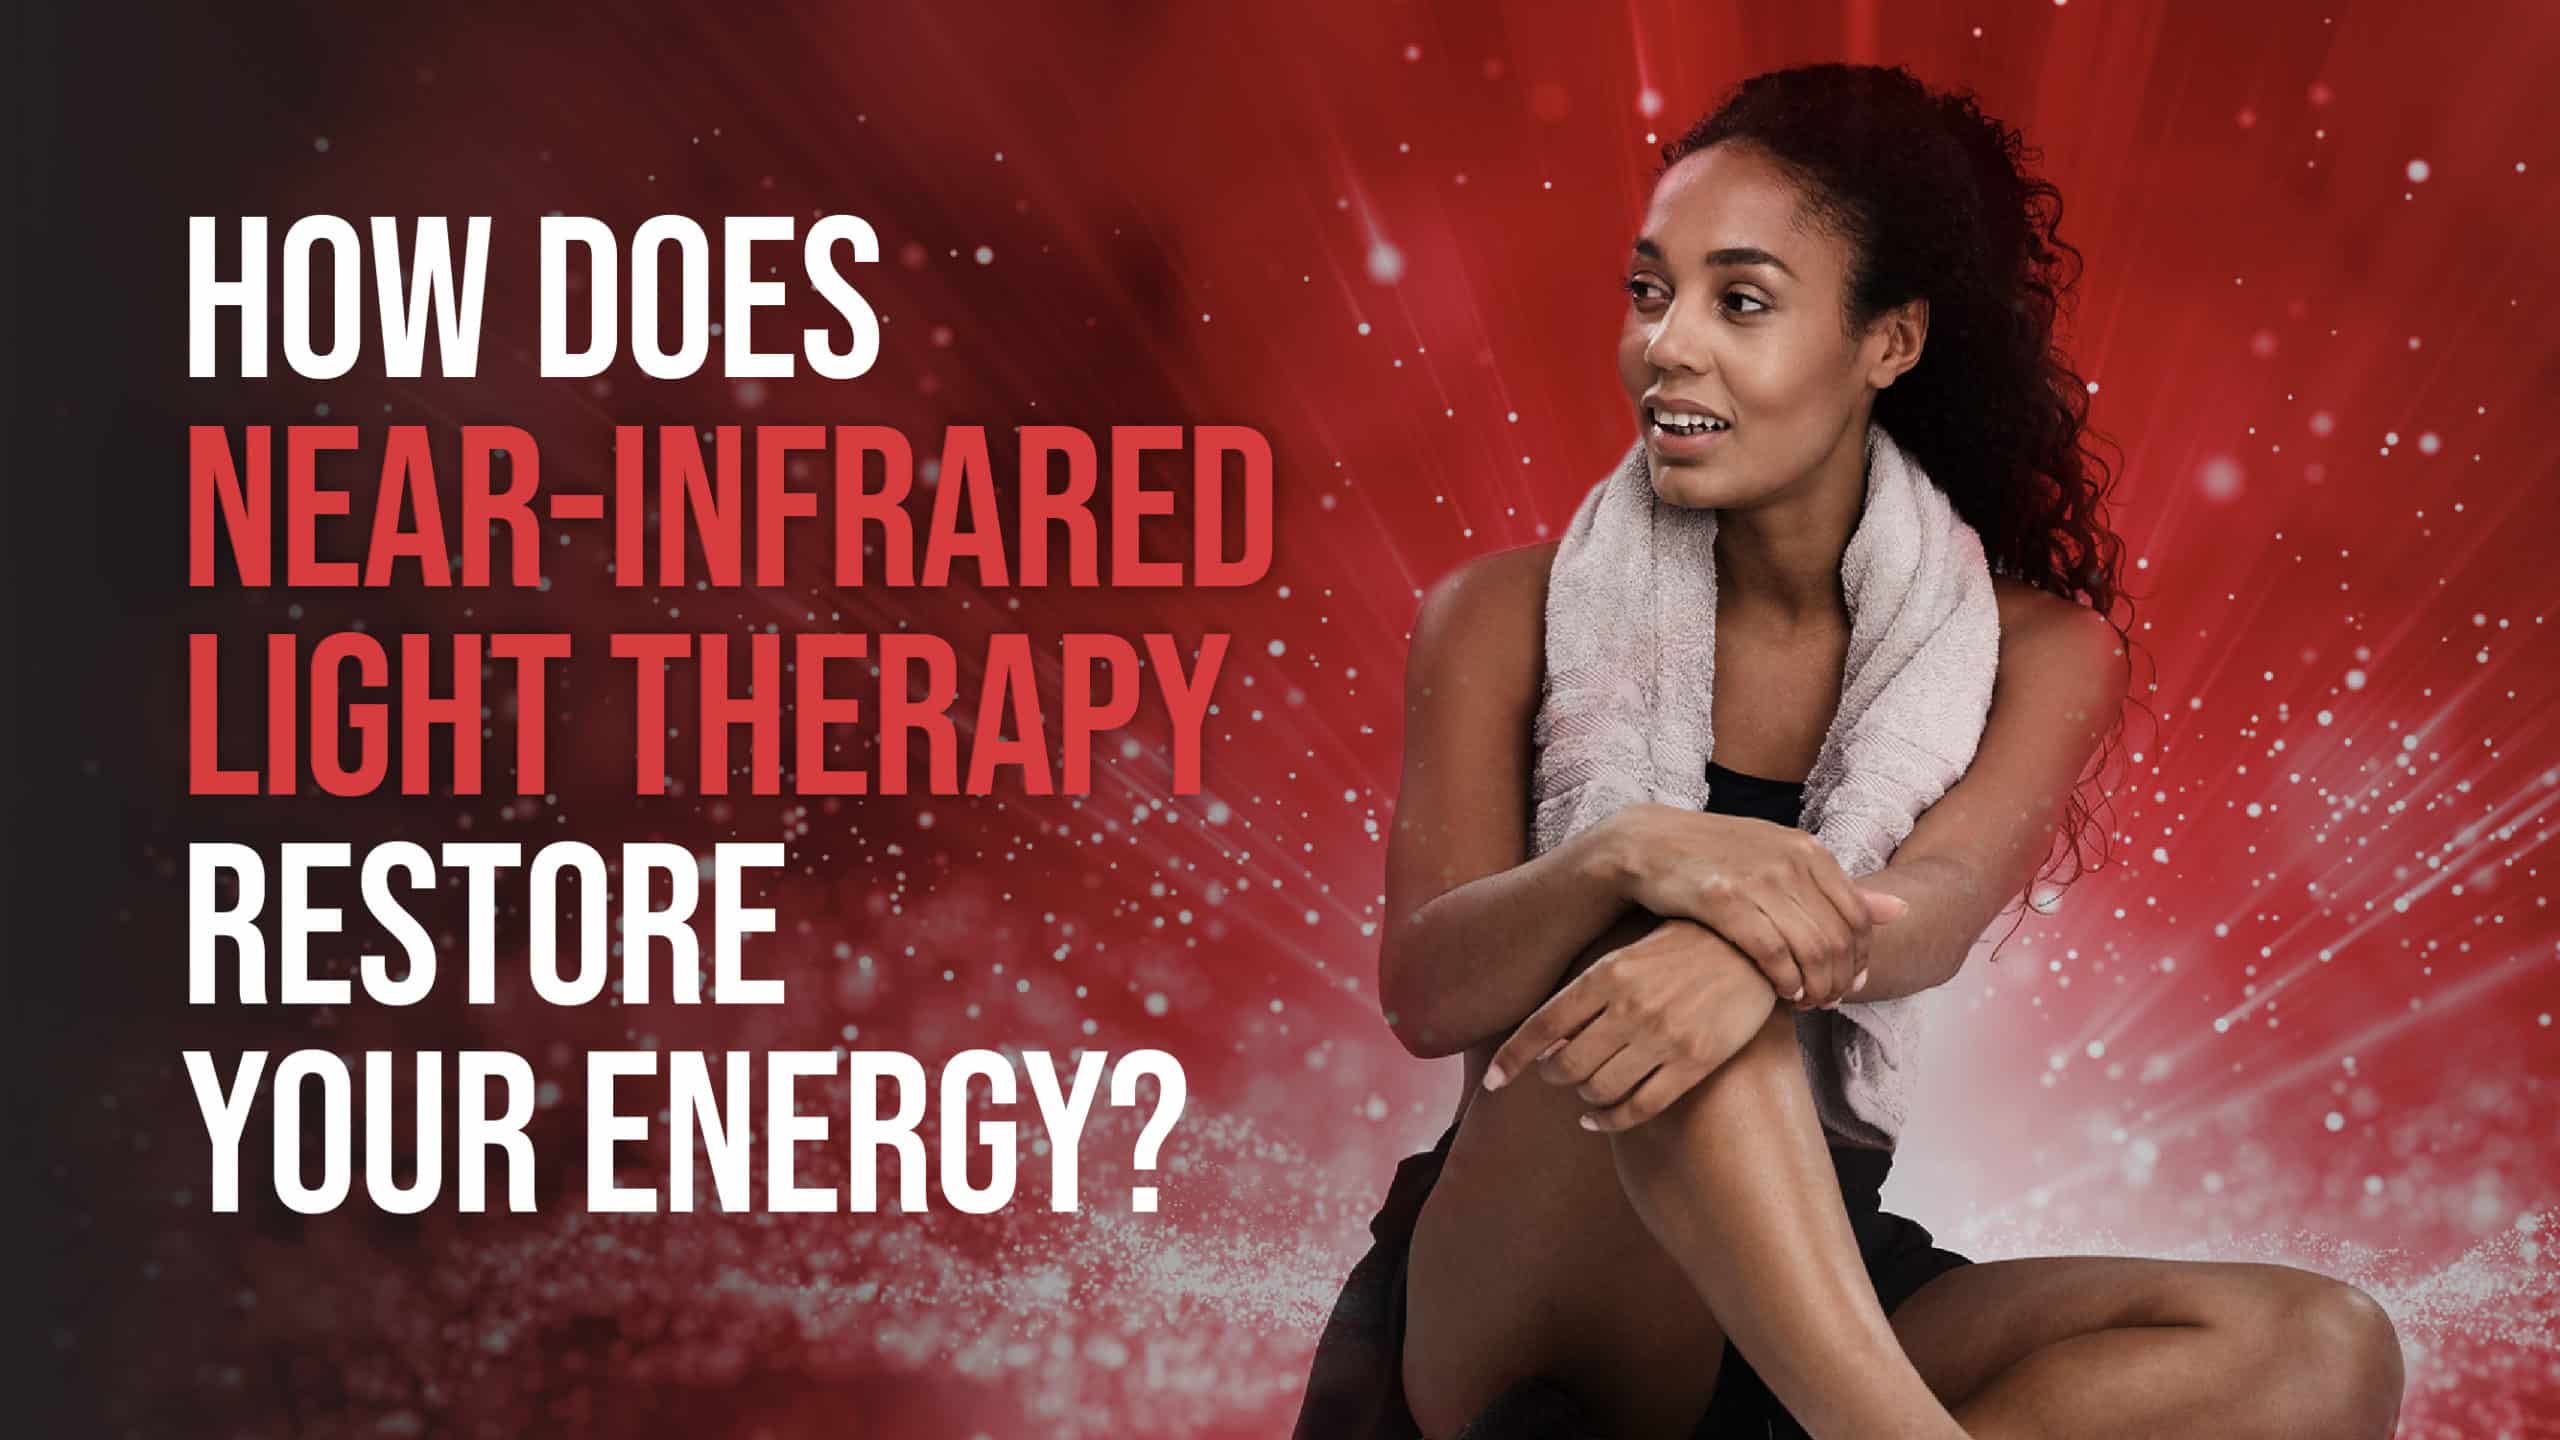 How Does Near Near-Infrared Light Therapy Restore Your Energy? featured image